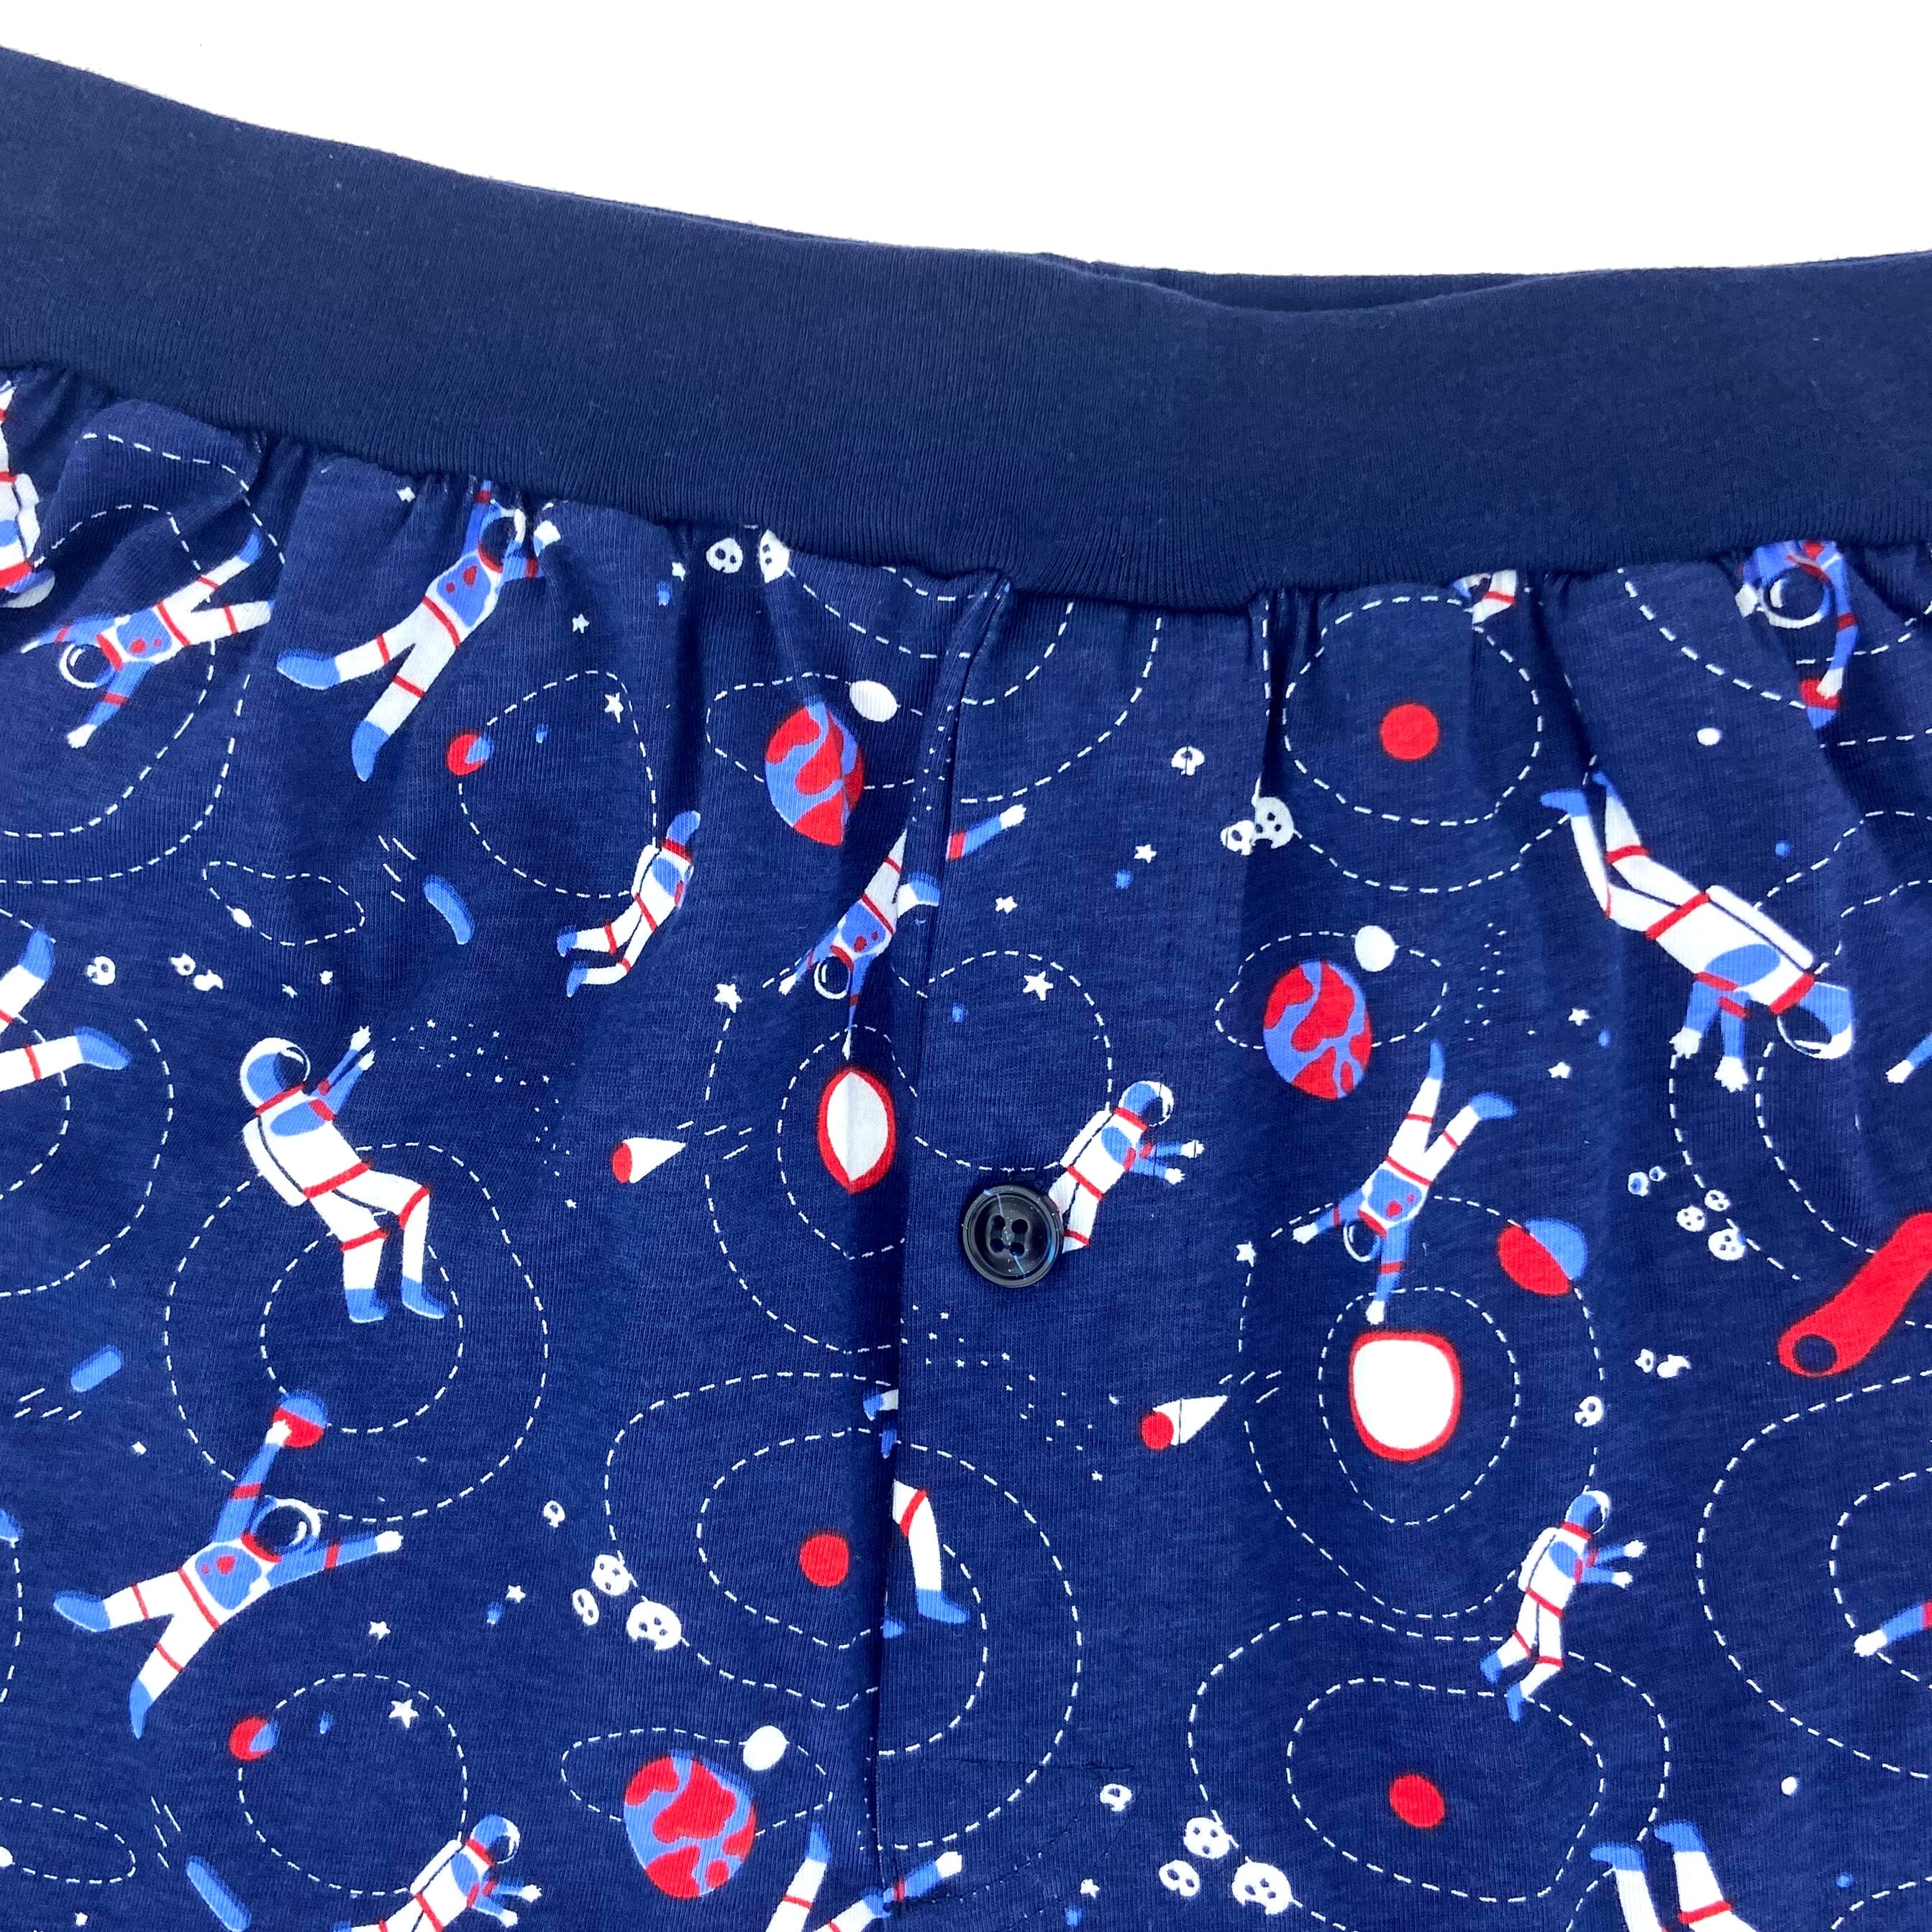 Mens Astronauts in Outer Space Novelty Print Cotton Knit Pajama Shorts